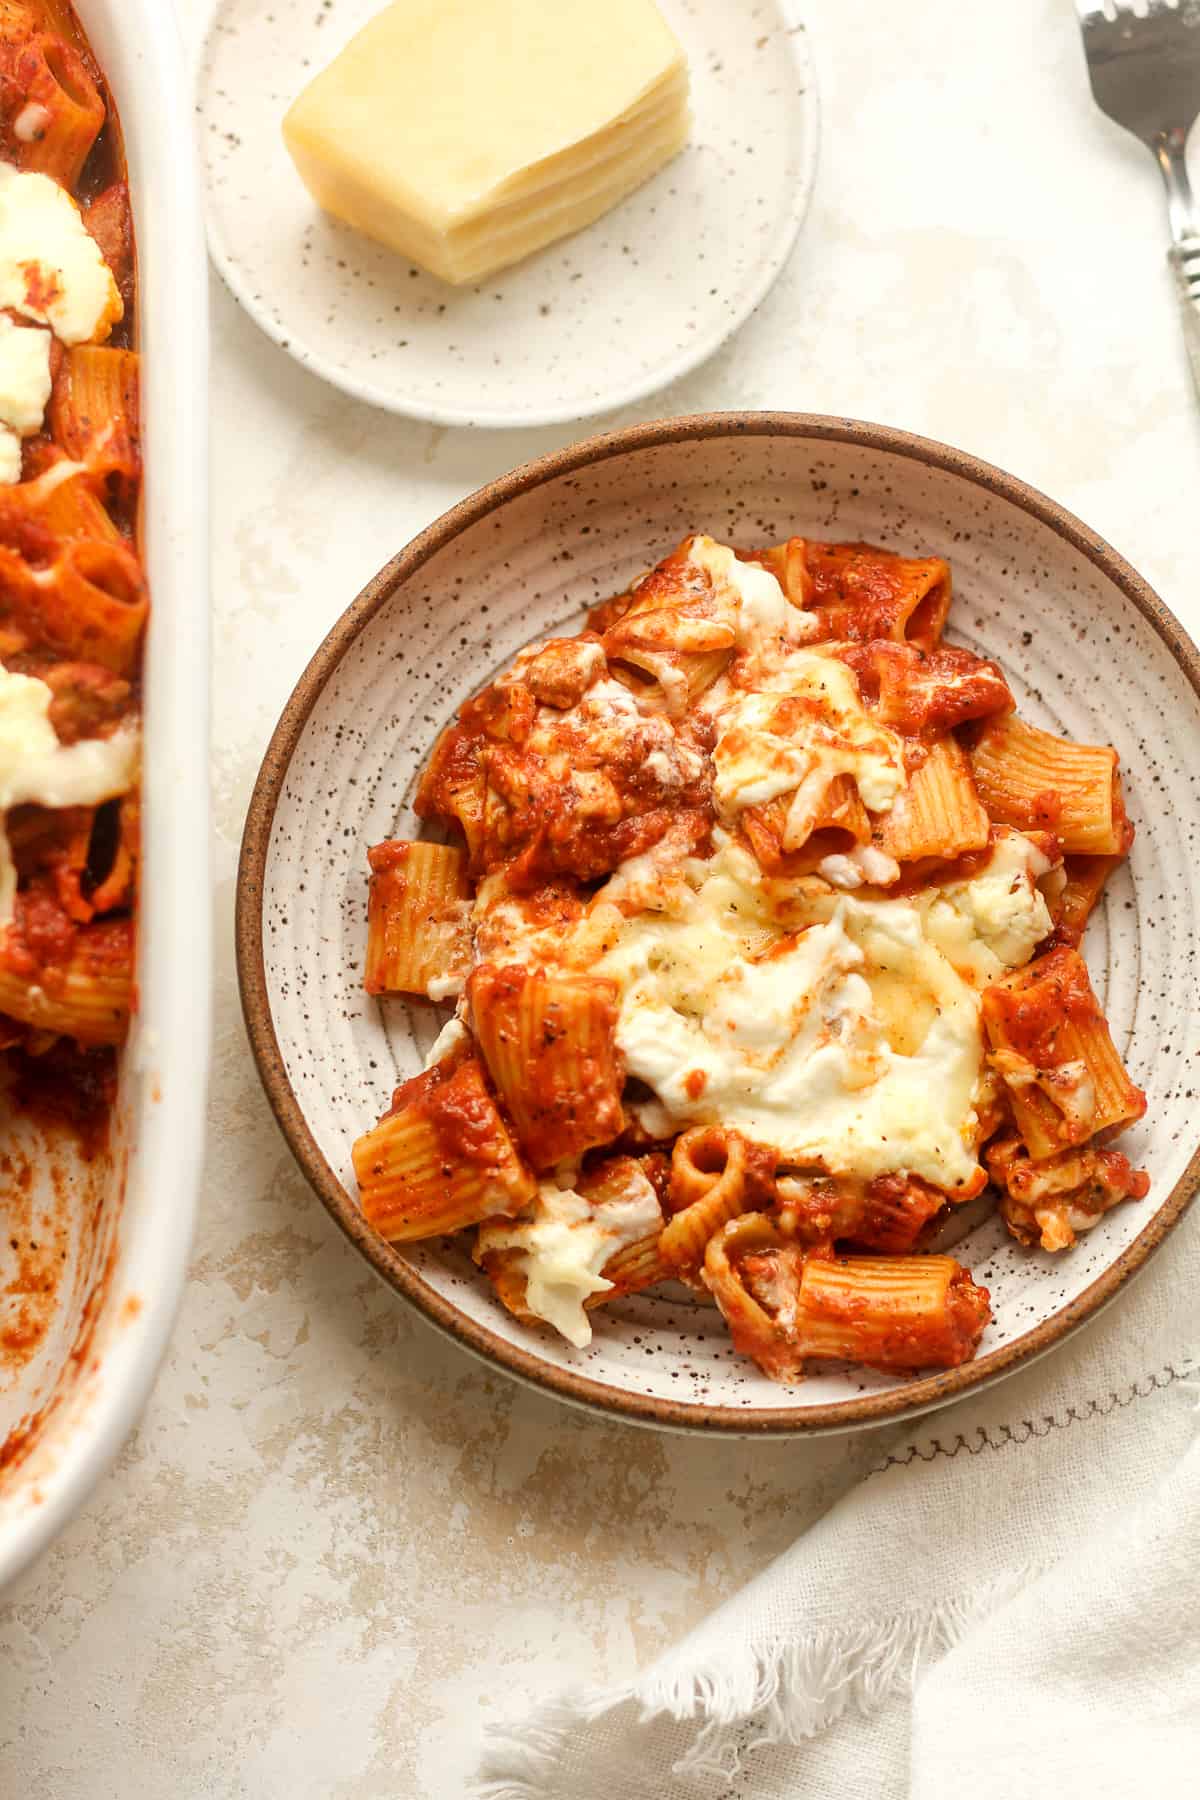 A serving bowl of baked rigatoni pasta next to a casserole dish.